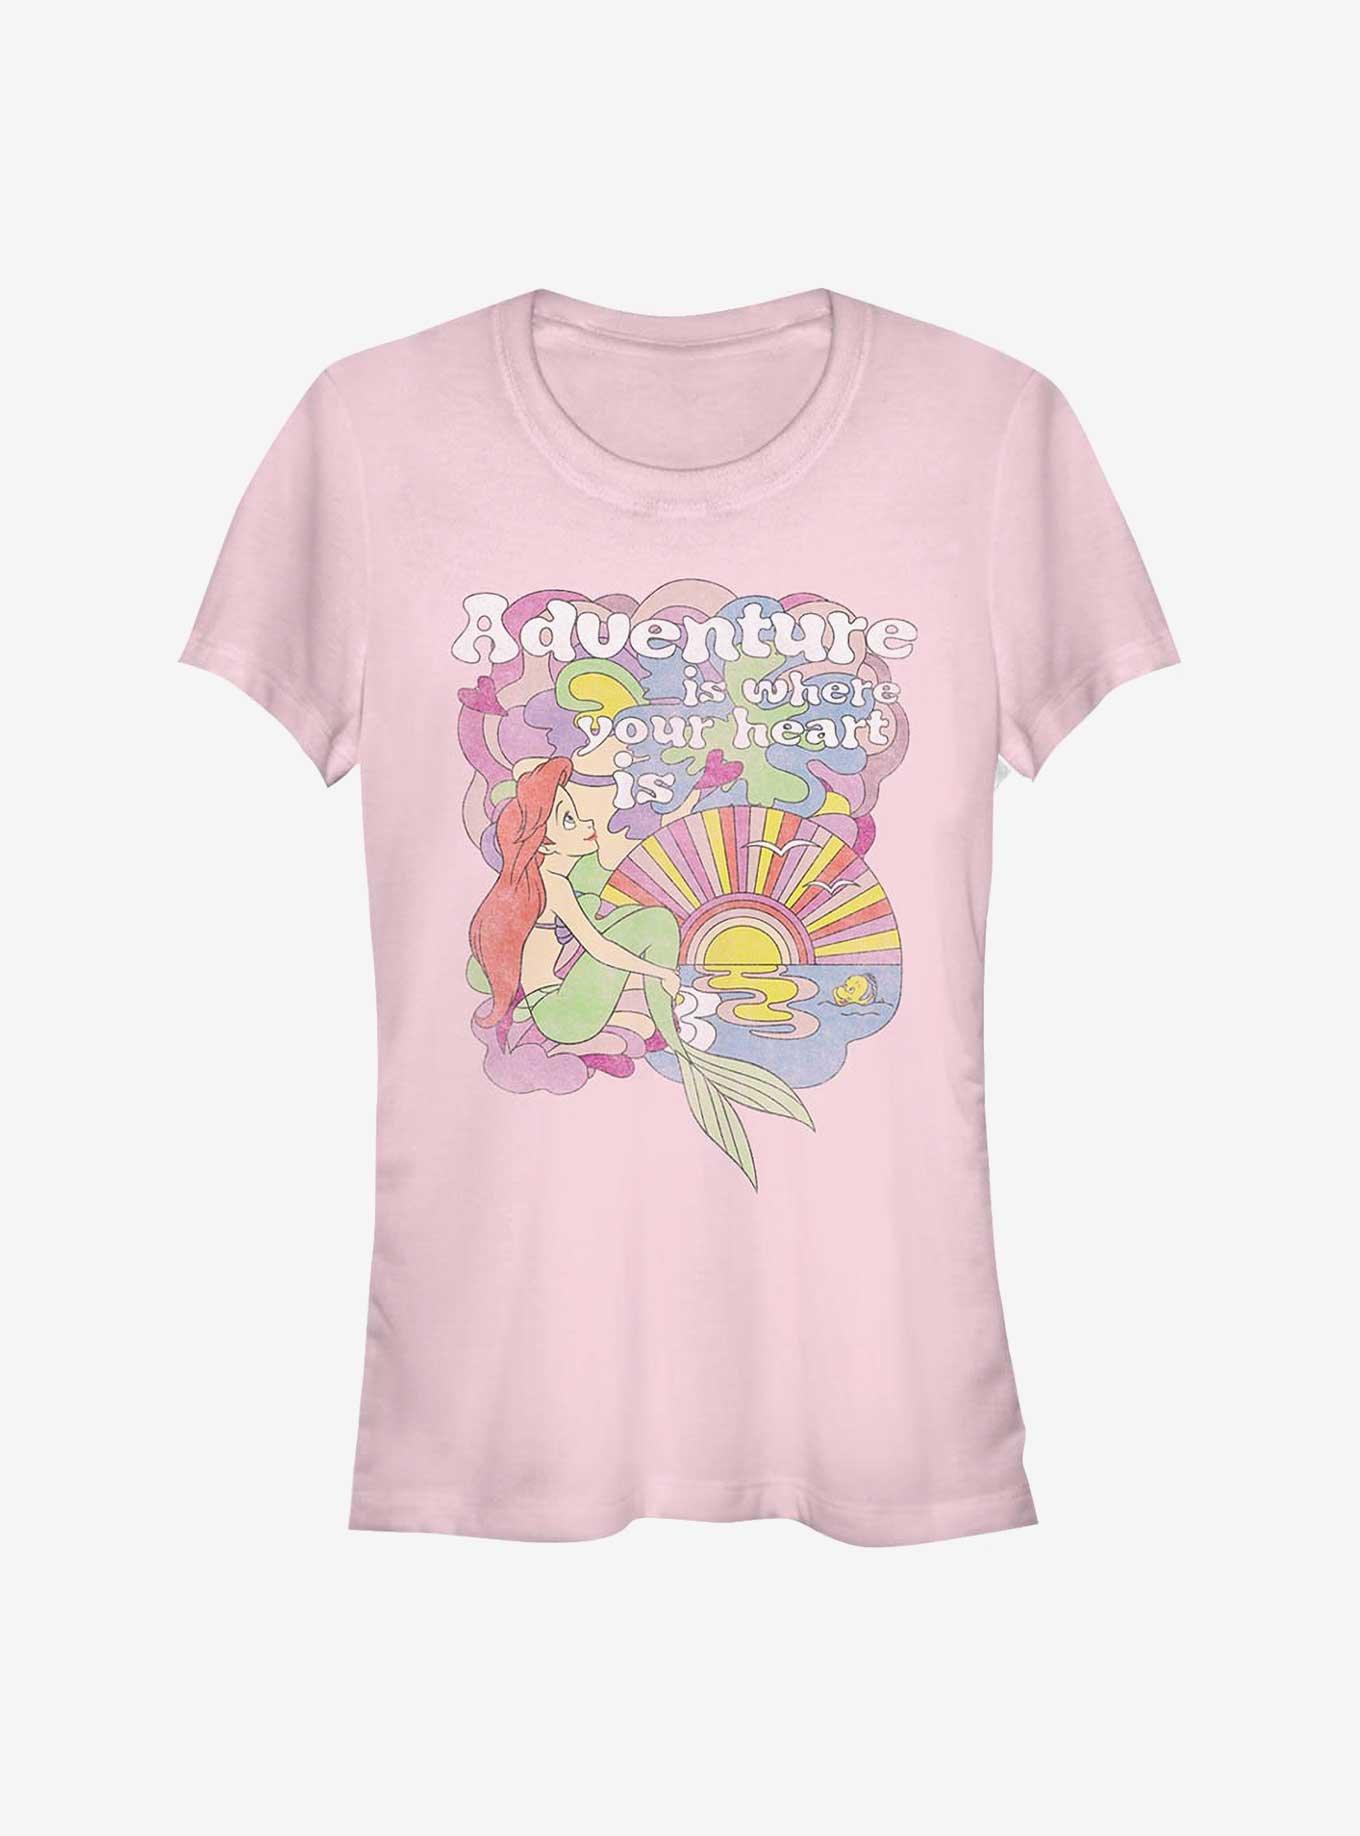 Disney The Little Mermaid Adventure Is Where Your Heart Is Girls T-Shirt, LIGHT PINK, hi-res